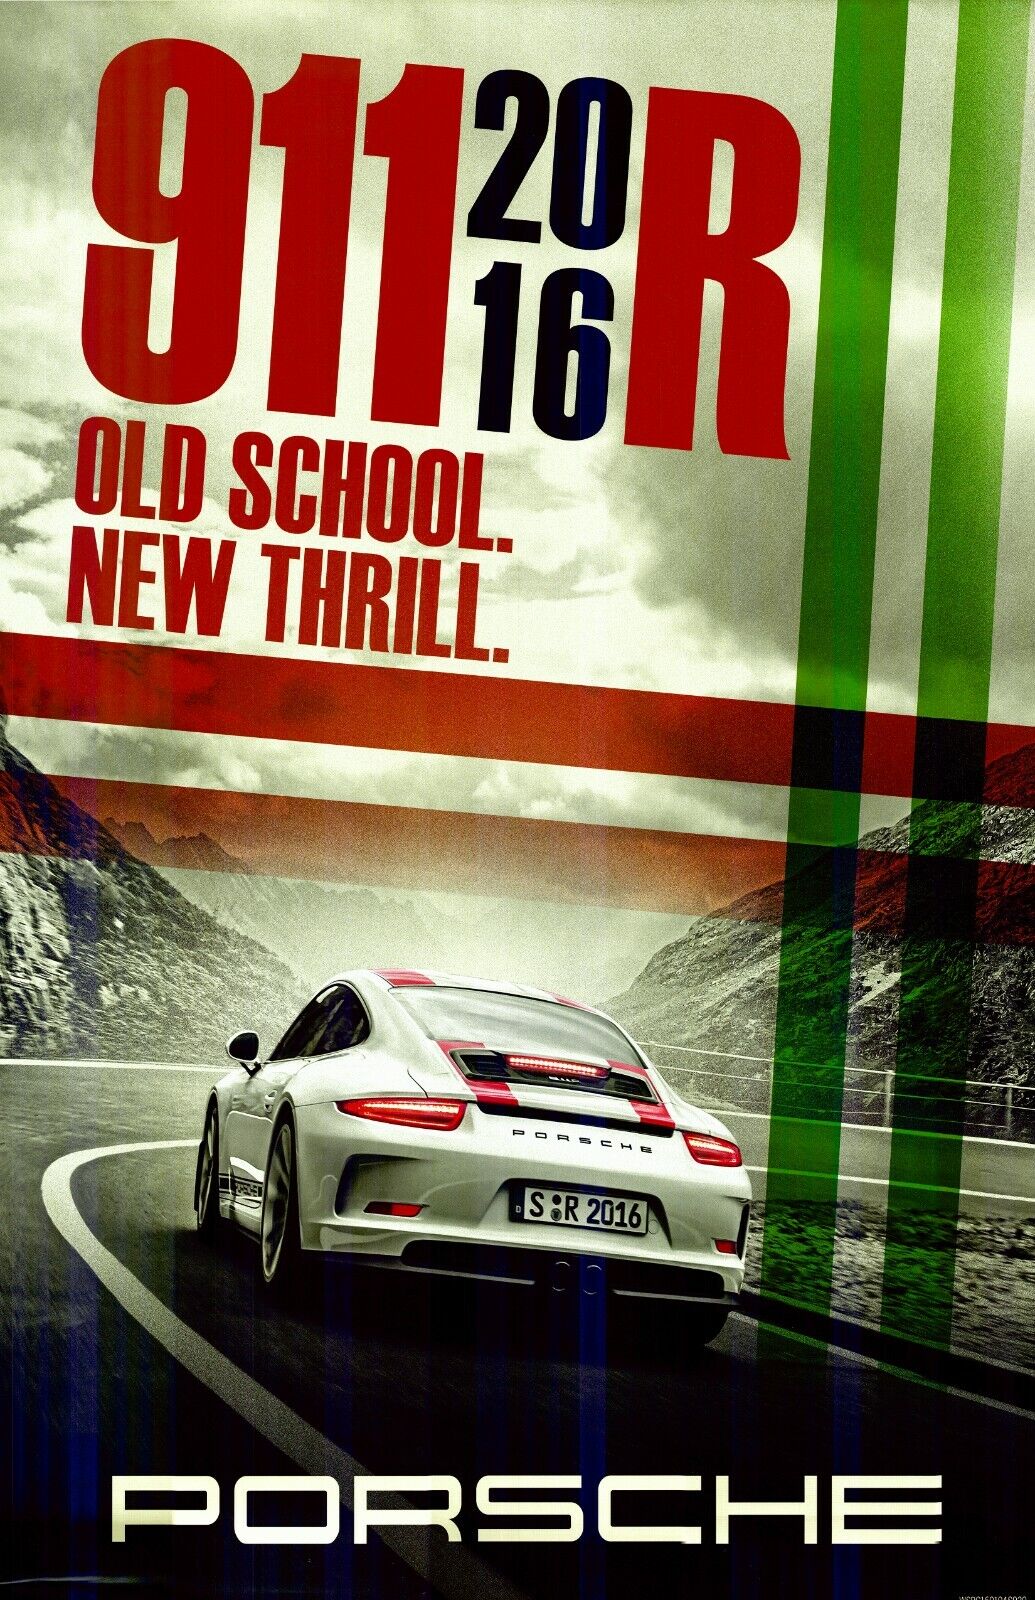 AWESOME PORSCHE POSTER 911R OLD SCHOOL NEW THRILL